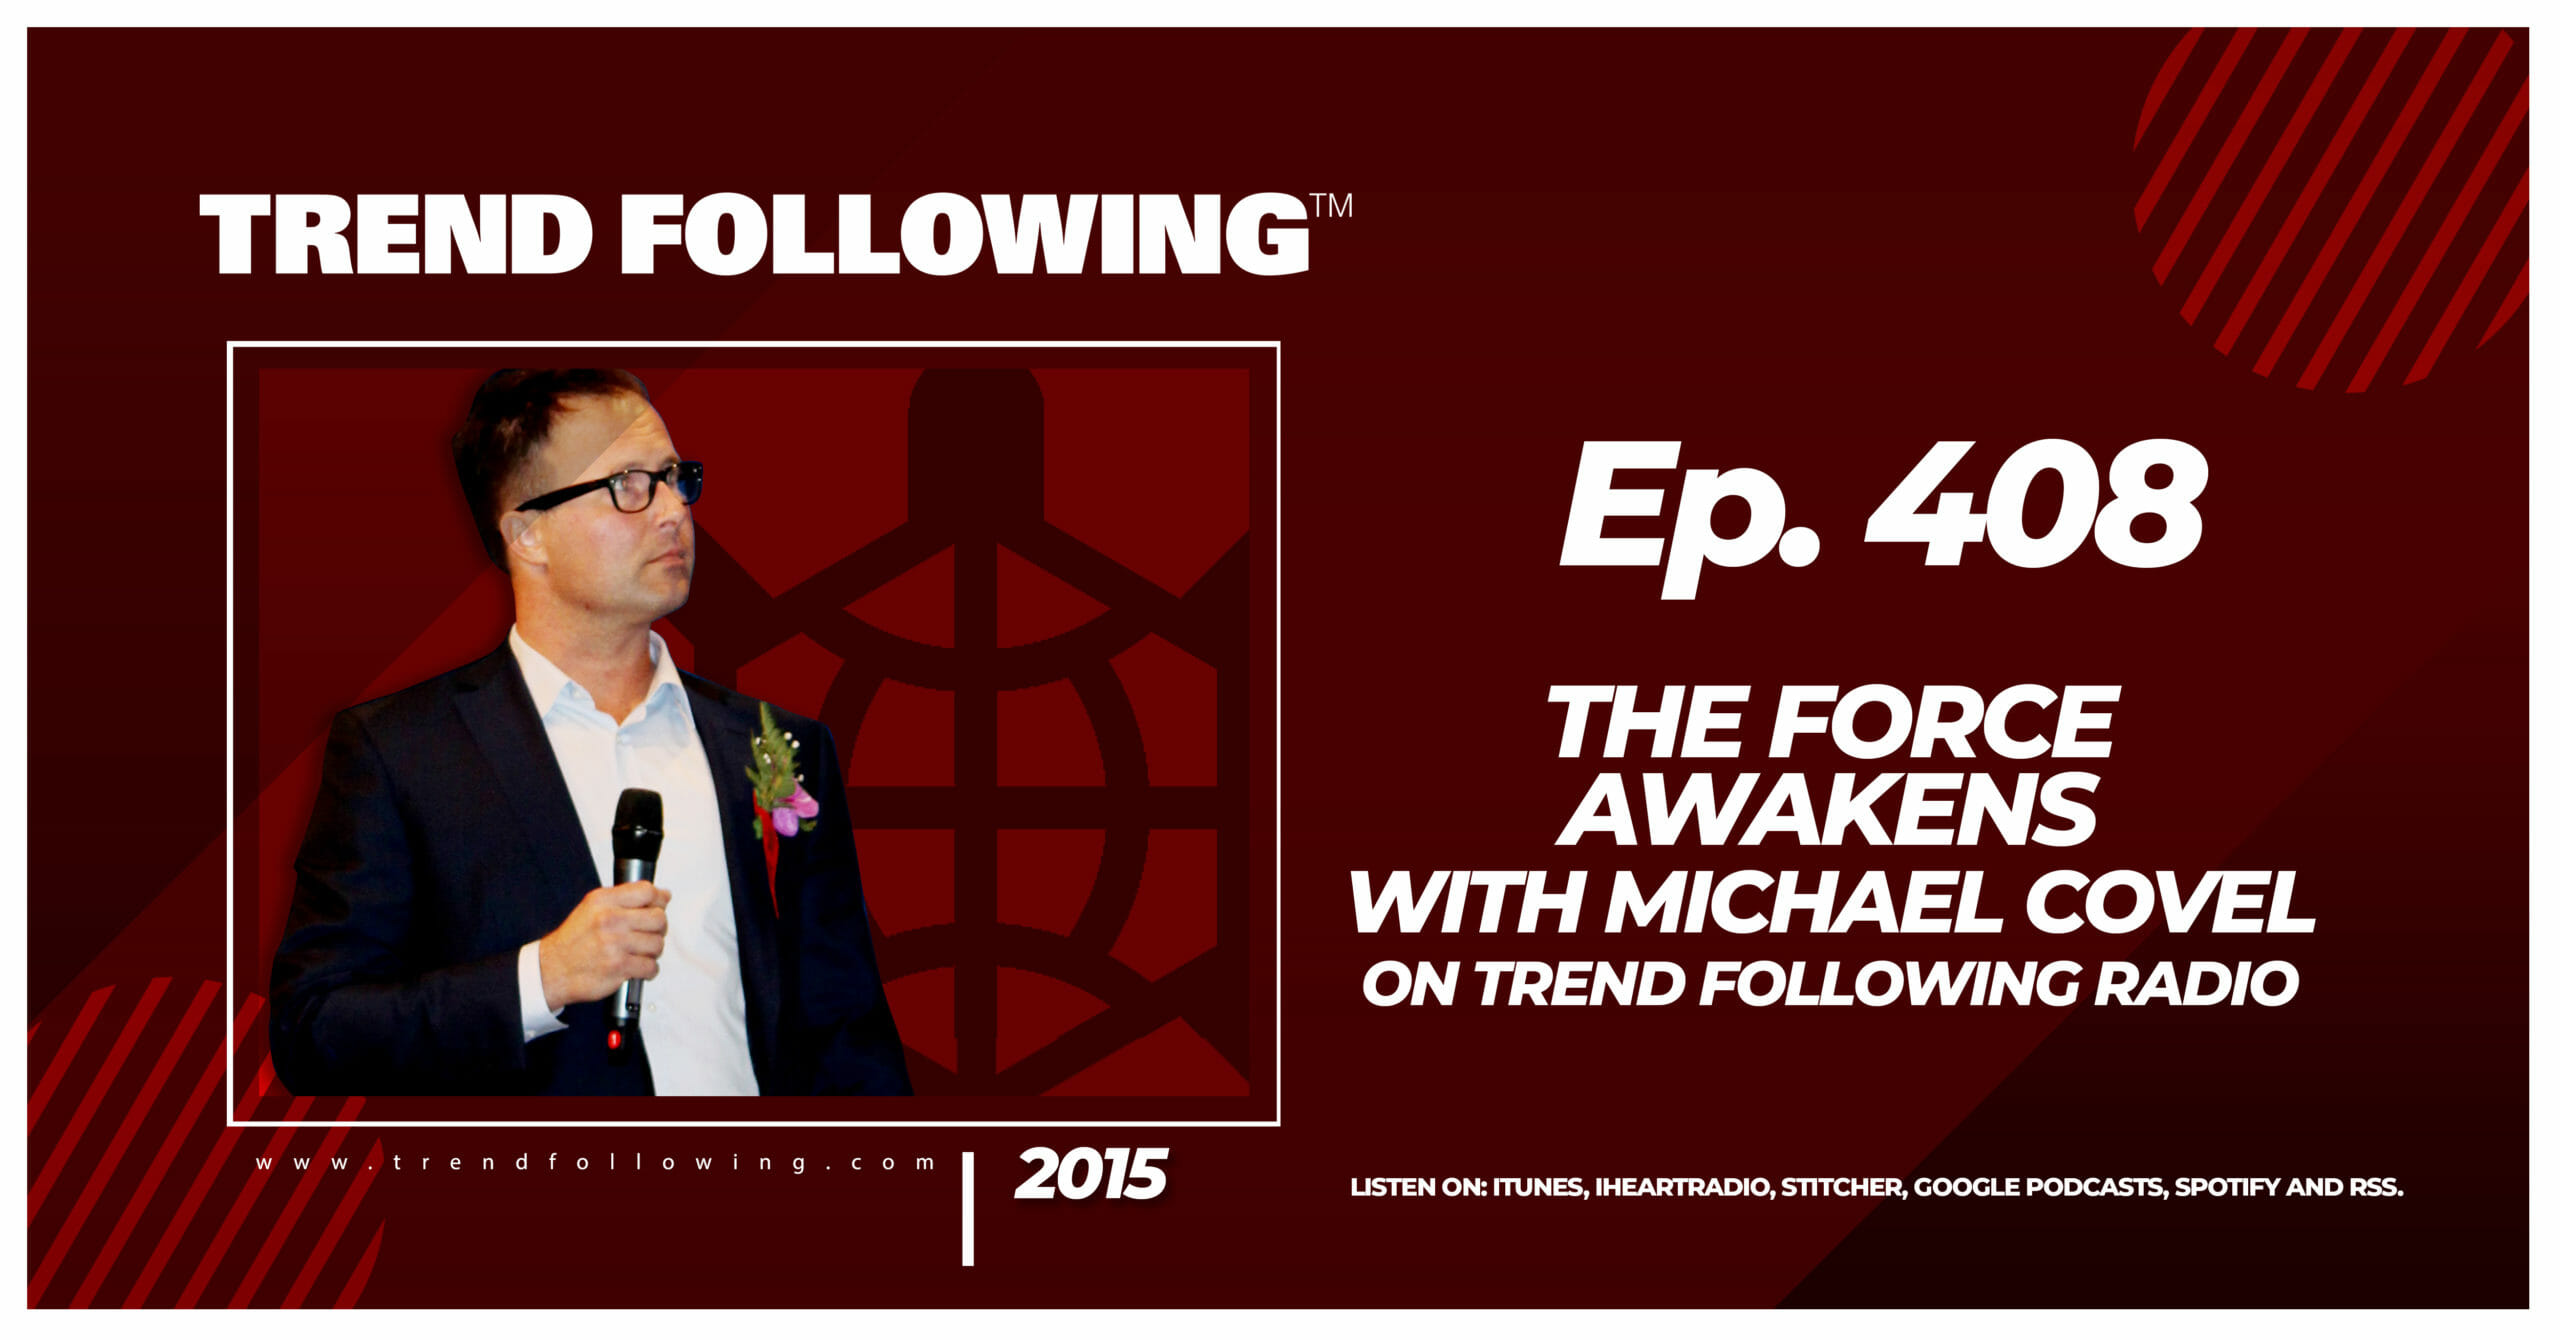 The Force Awakens with Michael Covel on Trend Following Radio